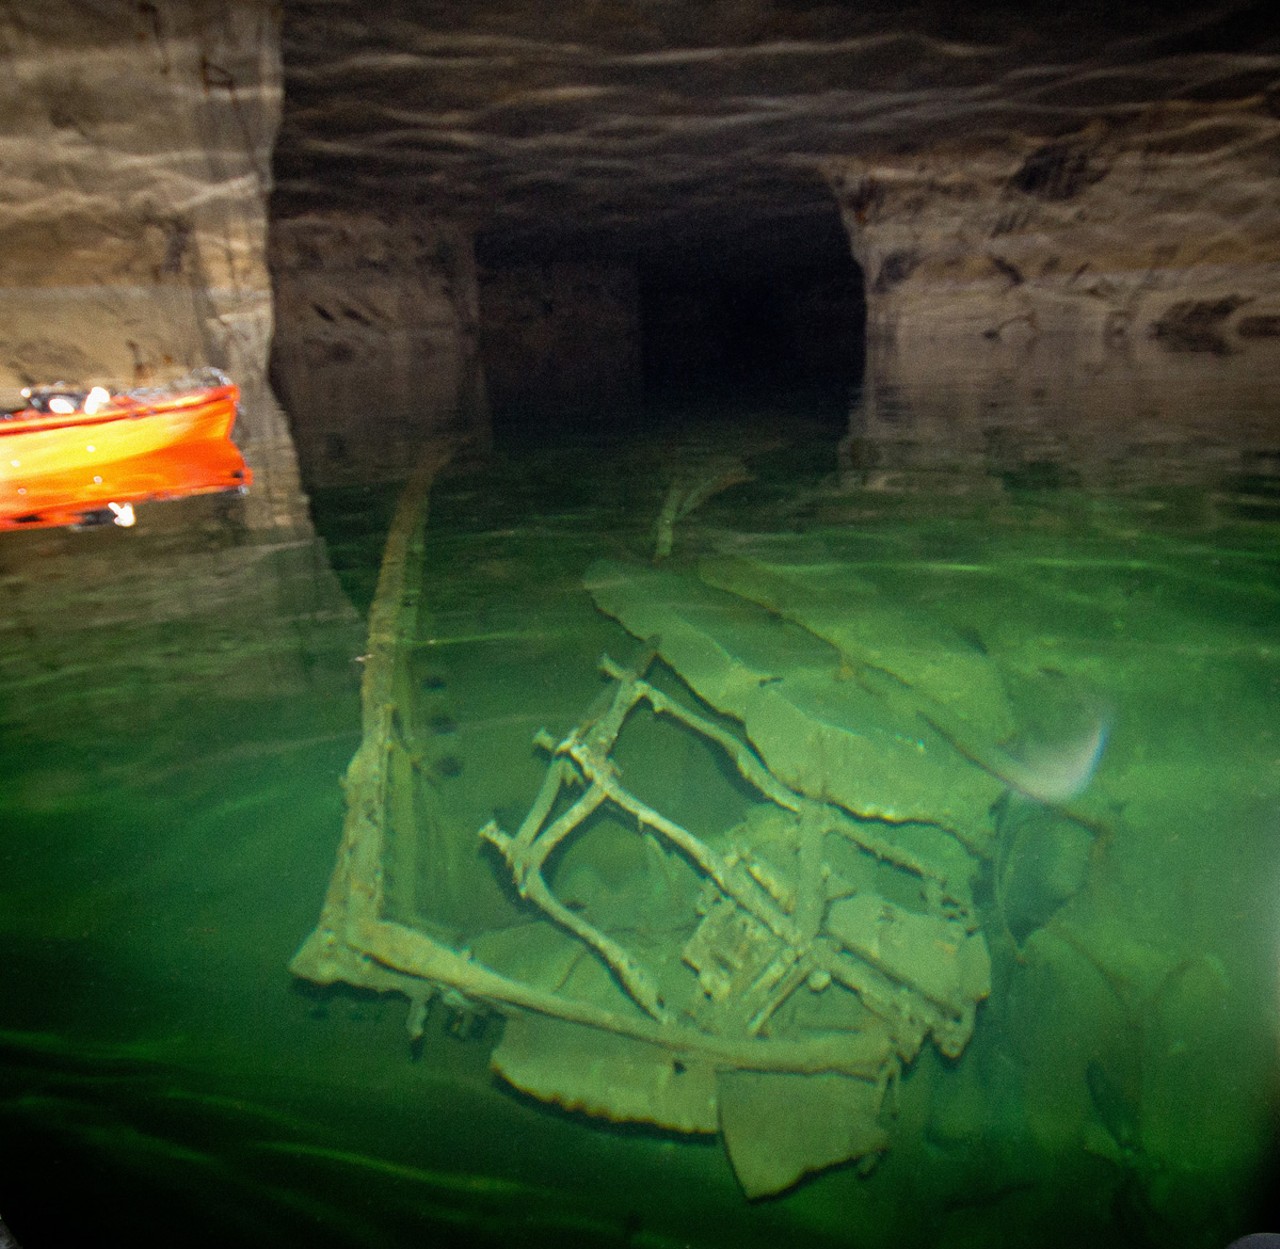 Many remnants of PPG's mining operation remain submerged in the flooded areas of the Crystal City Underground complex.